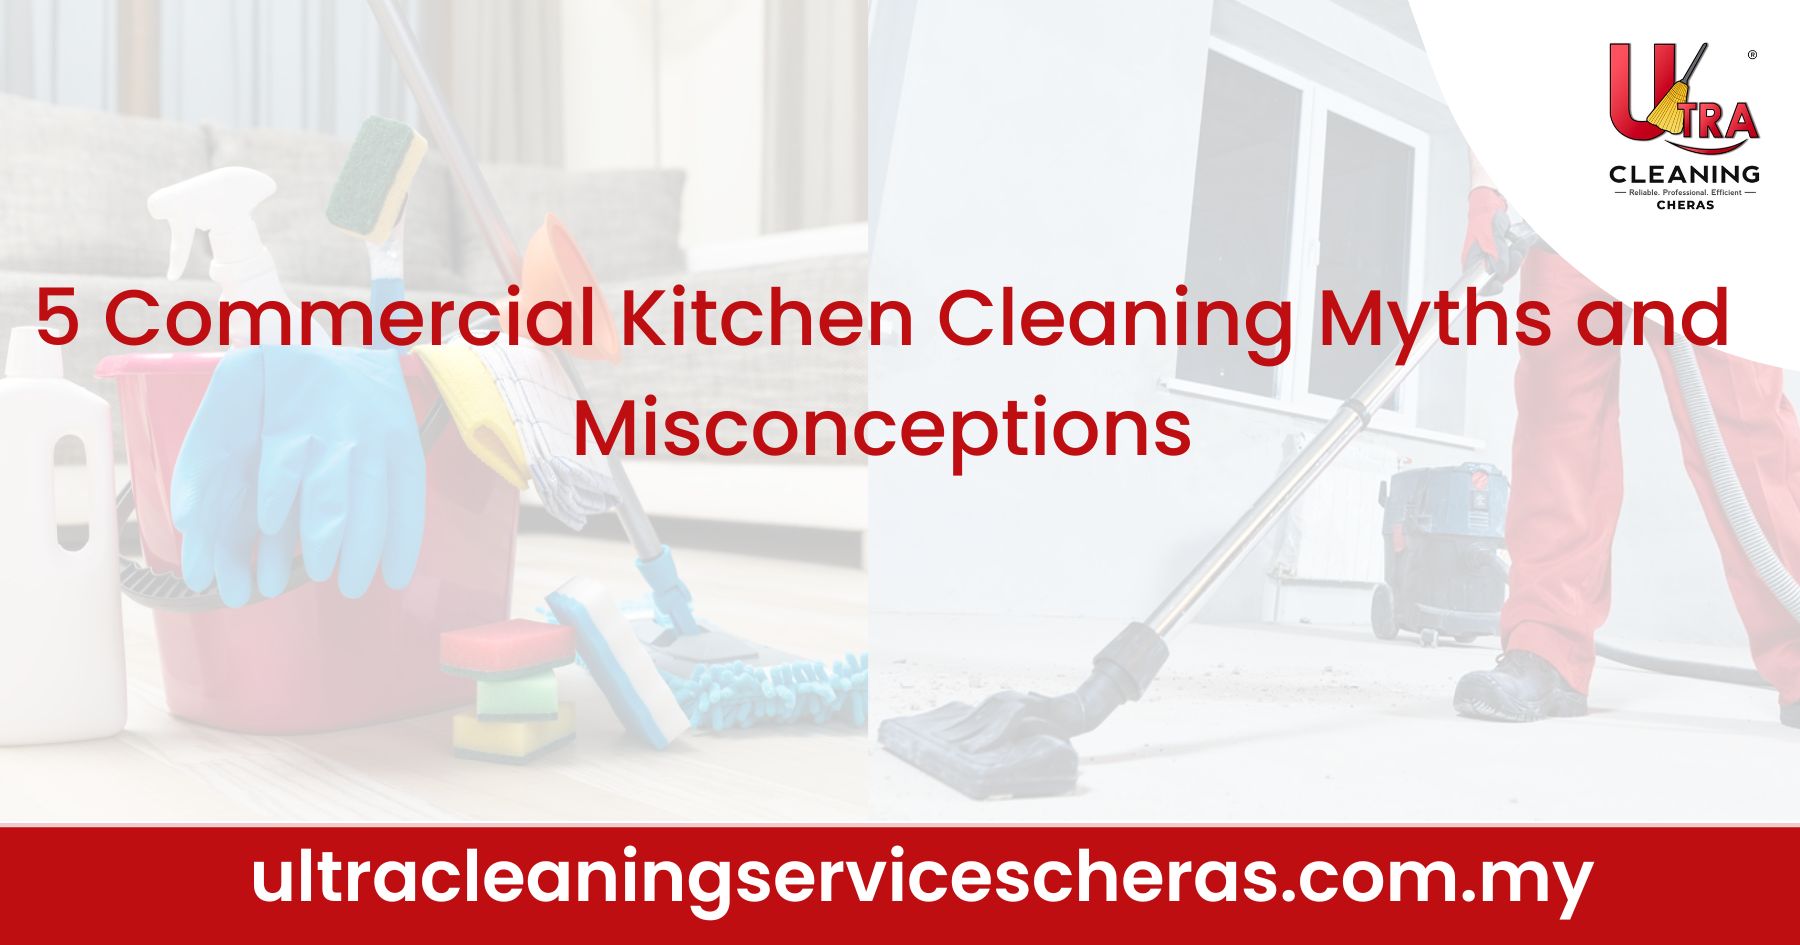 5 Commercial Kitchen Cleaning Myths and Misconceptions